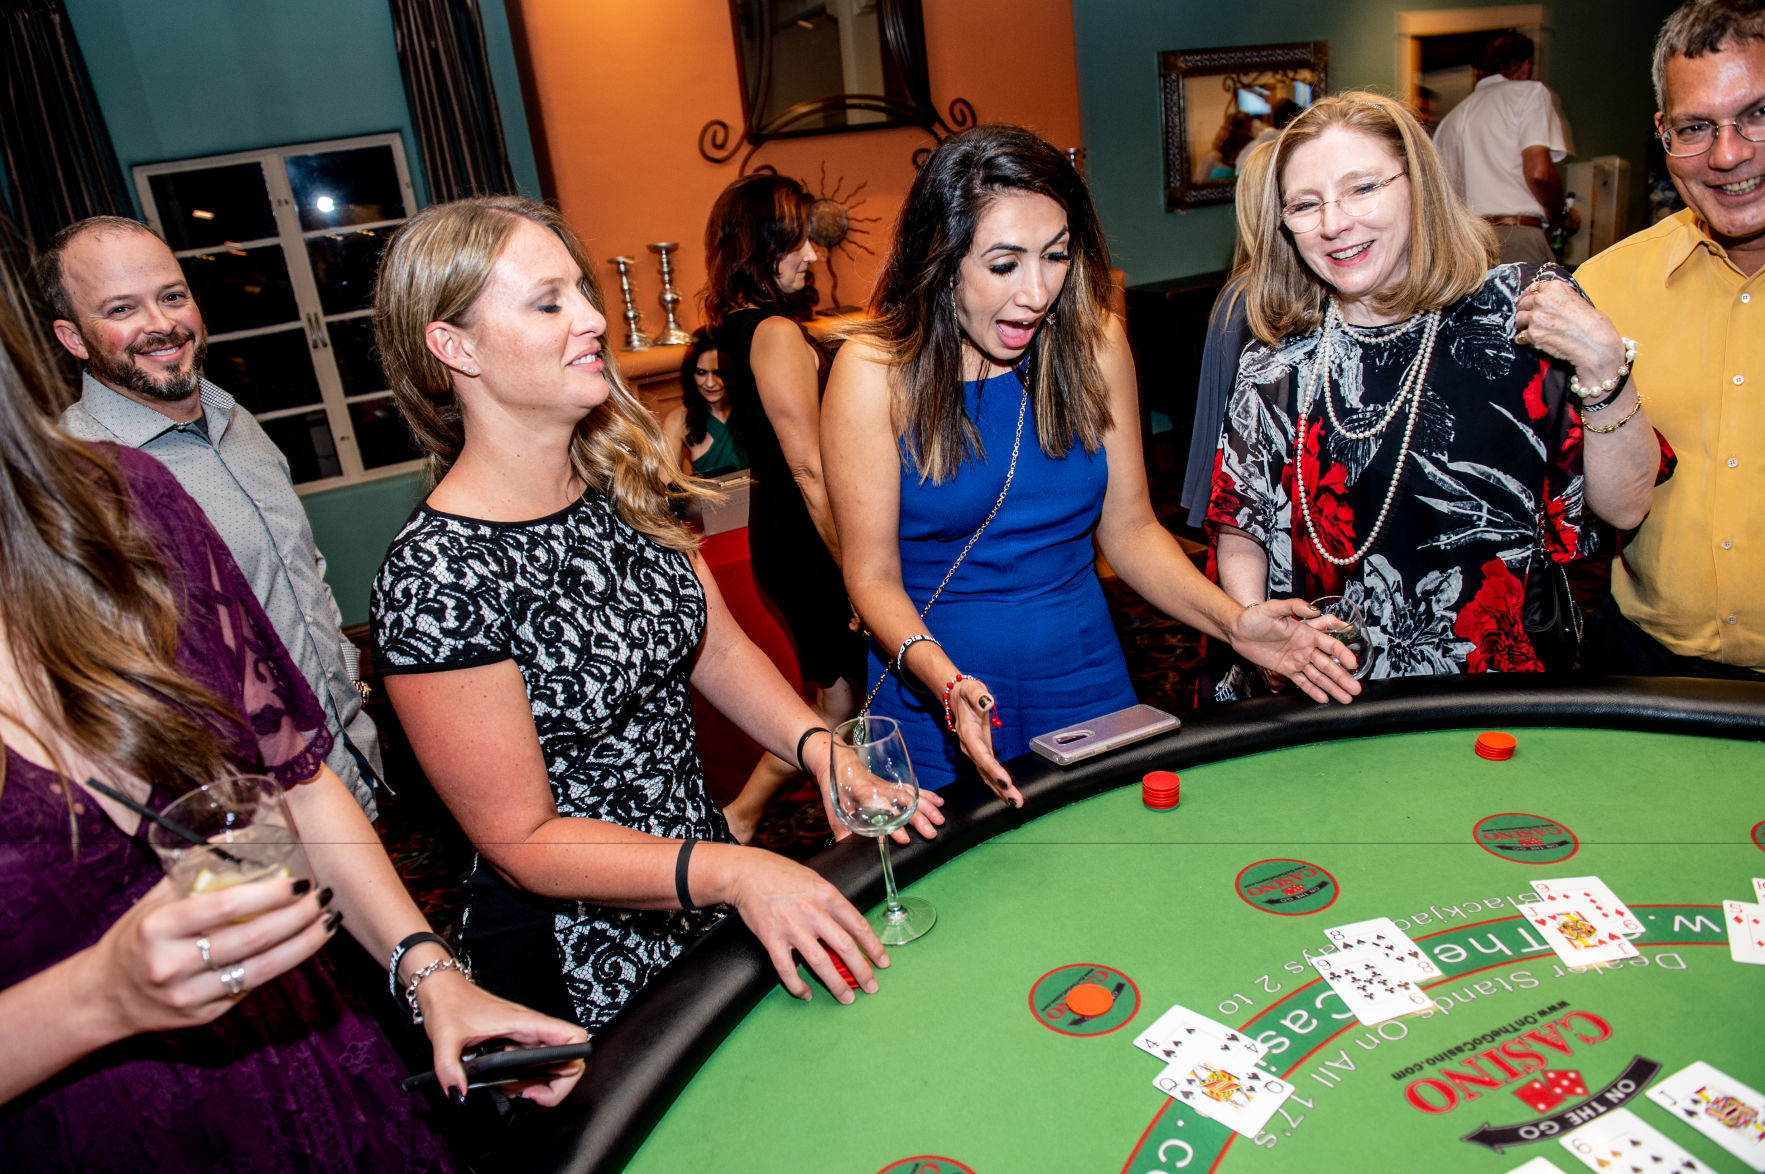 Casino night will raise funds for 10 Angel Charity beneficiaries